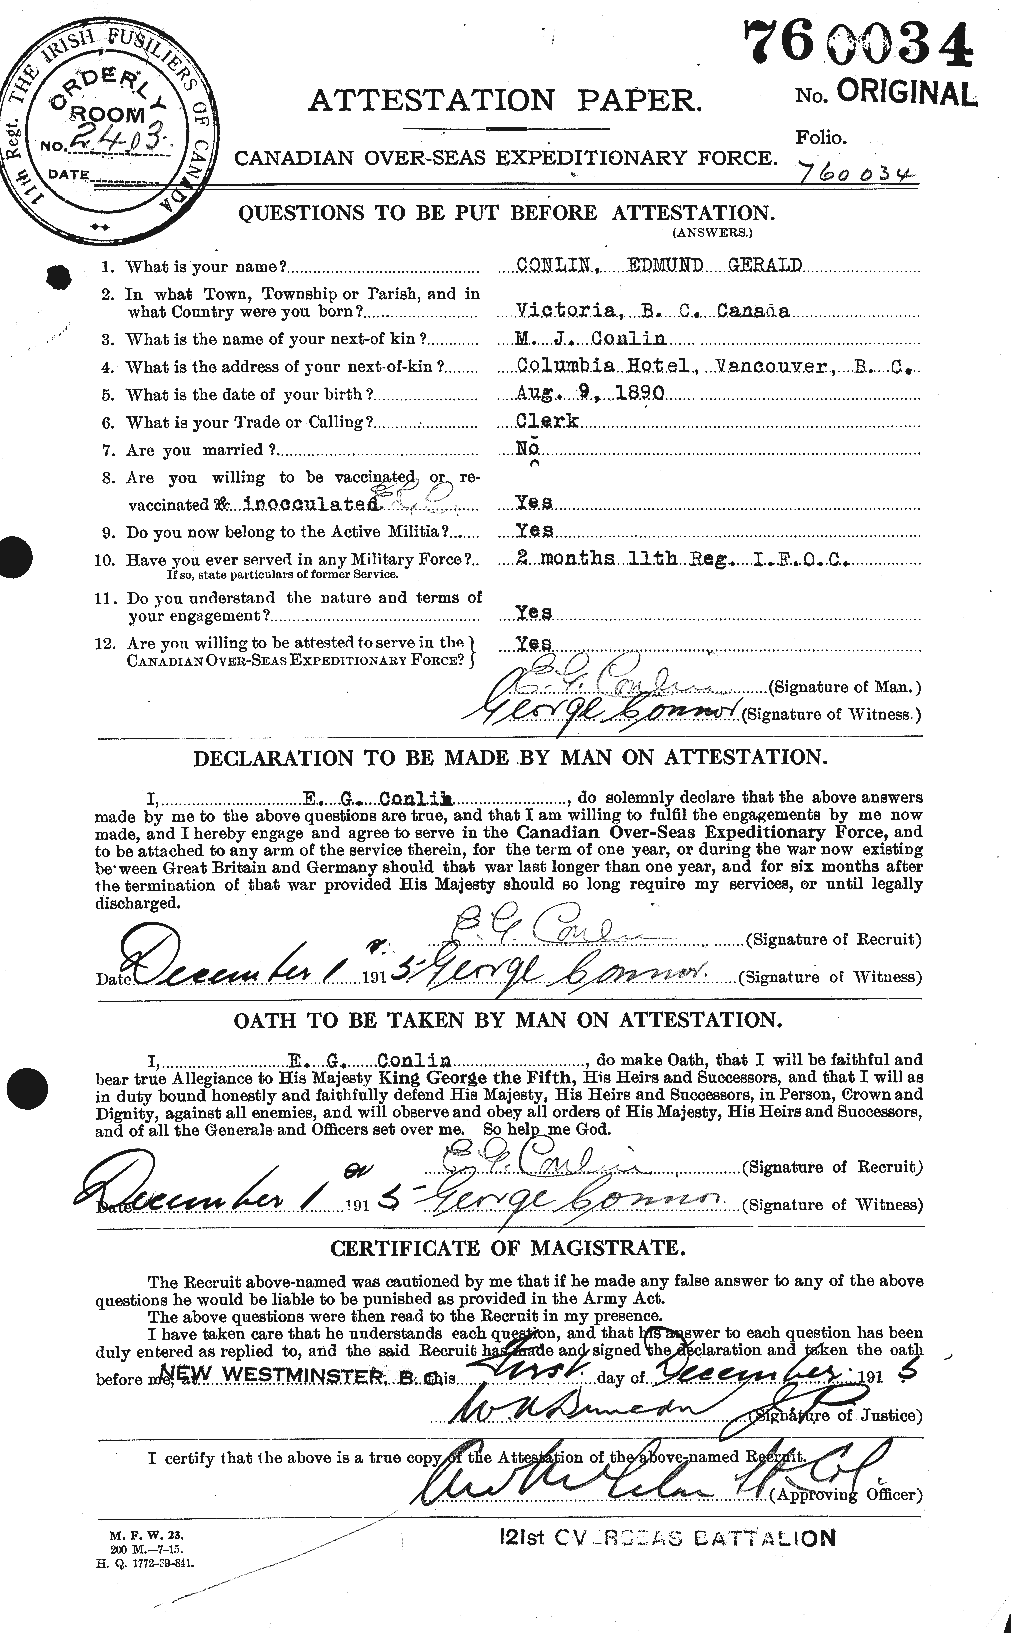 Personnel Records of the First World War - CEF 067782a